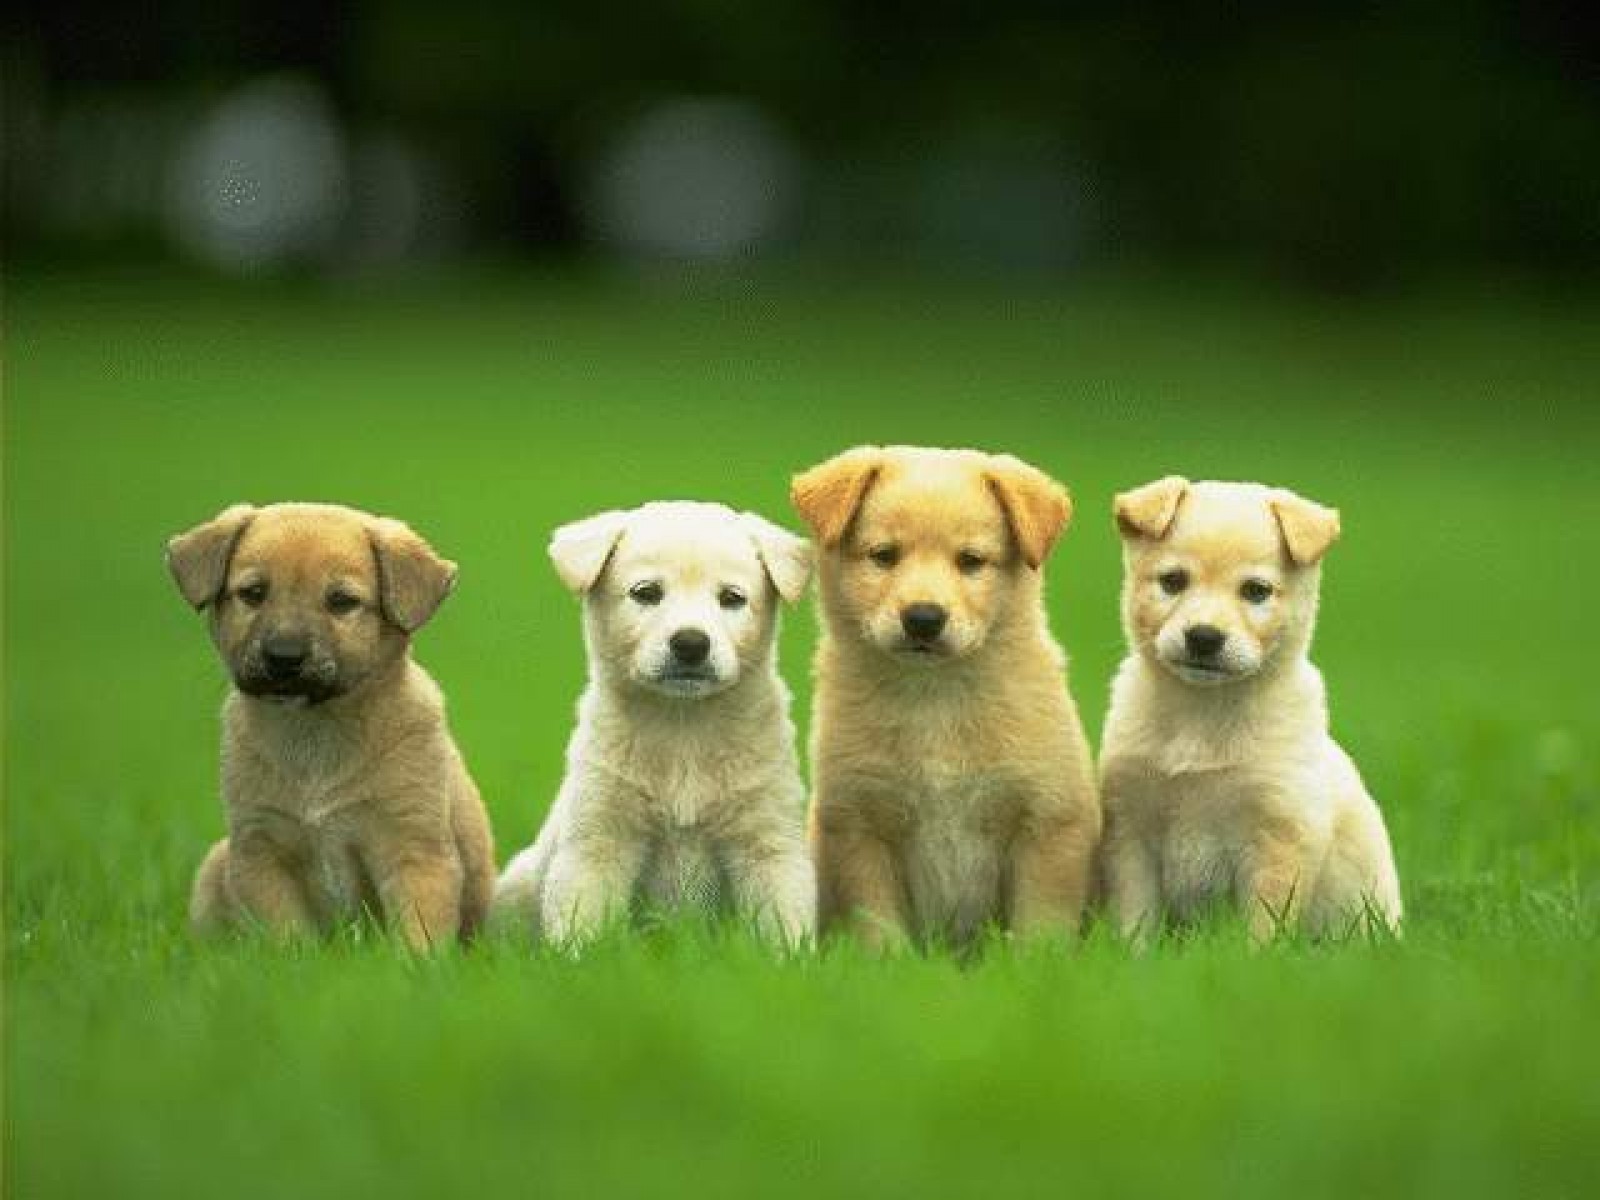 Cute And Funny Puppies Small Dog Animals Dogs Widescreen